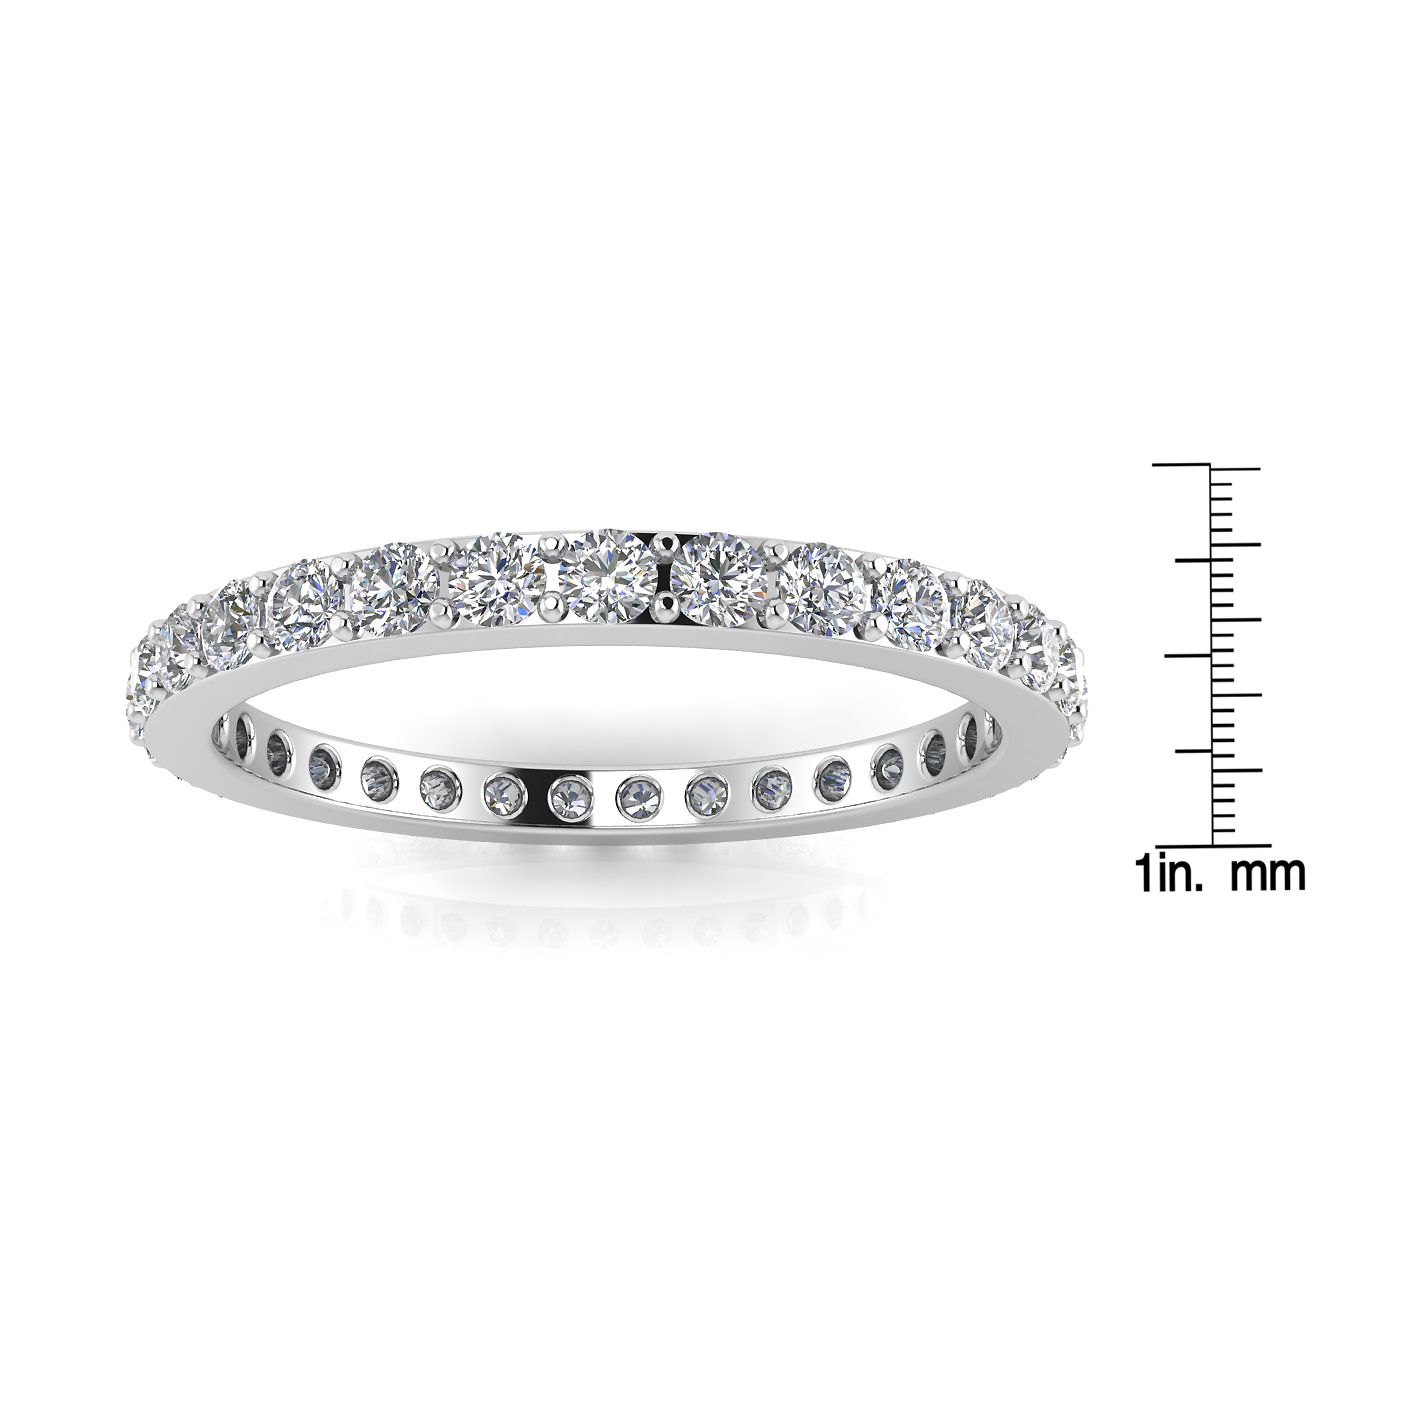 Round Brilliant Cut Diamond Pave Set Eternity Ring In 14k White Gold  (0.46ct. Tw.) Ring Size 6